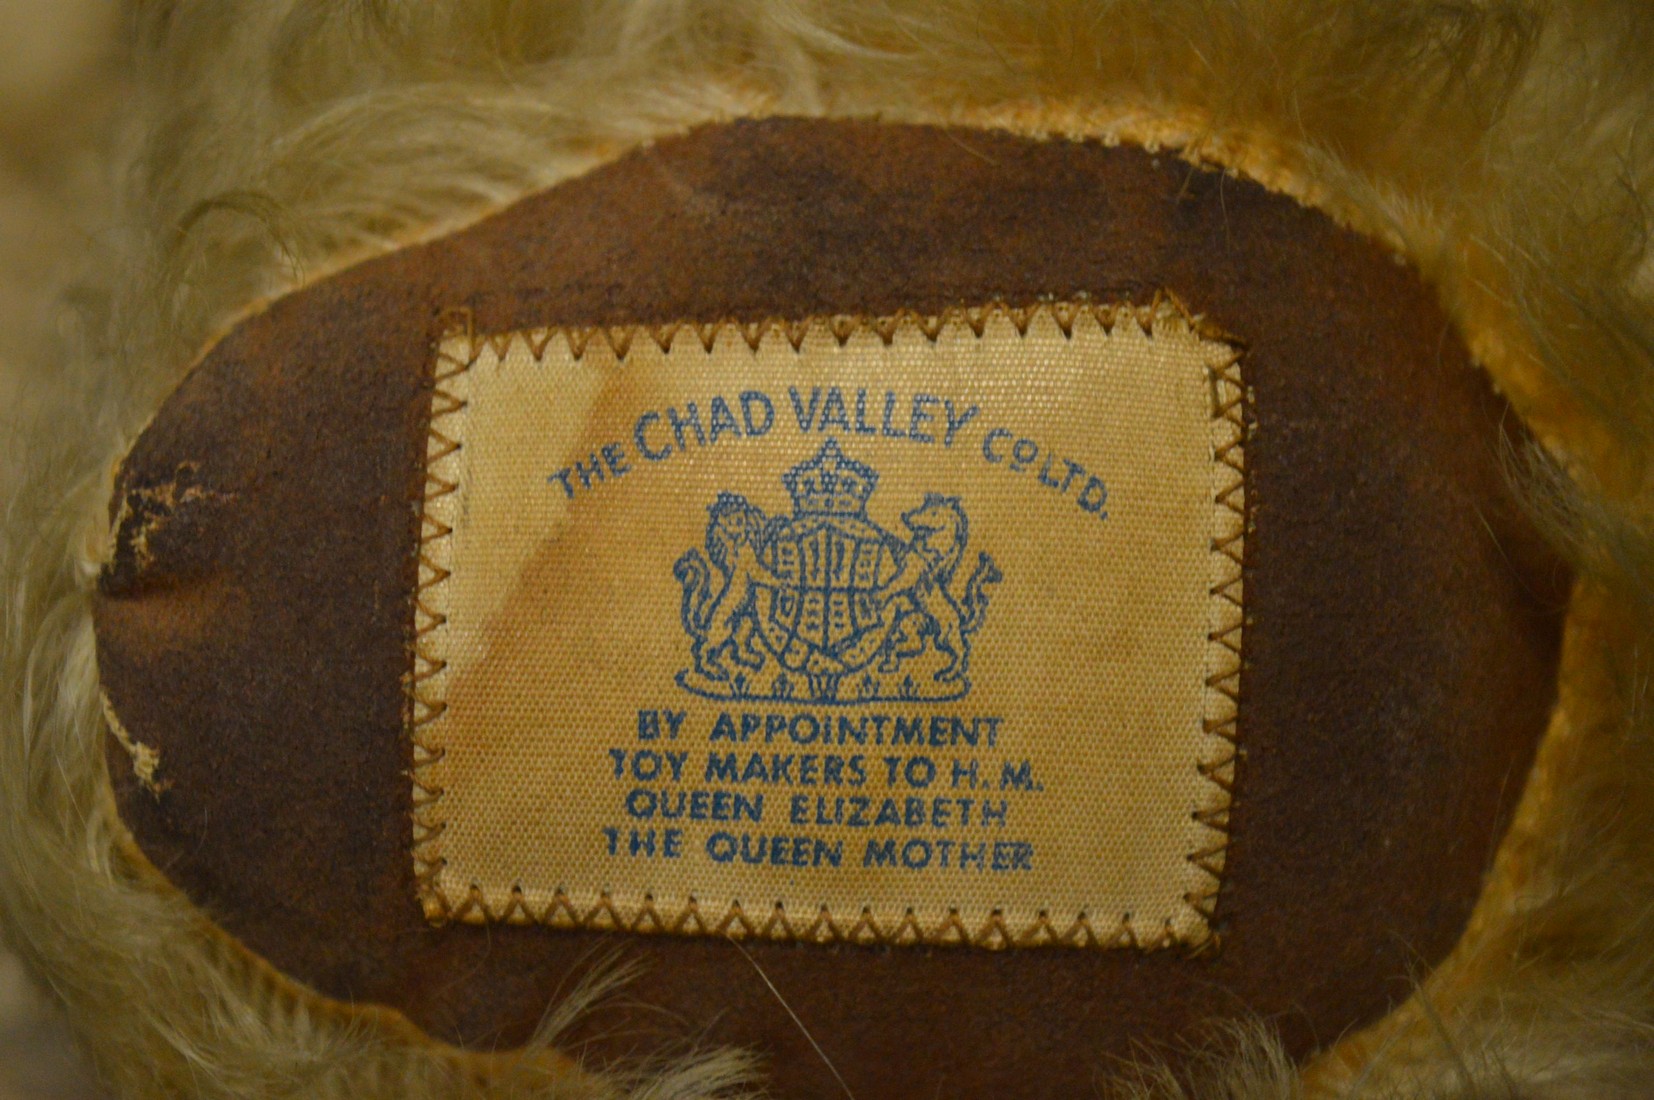 A Chad Valley teddy bear. - Image 2 of 2